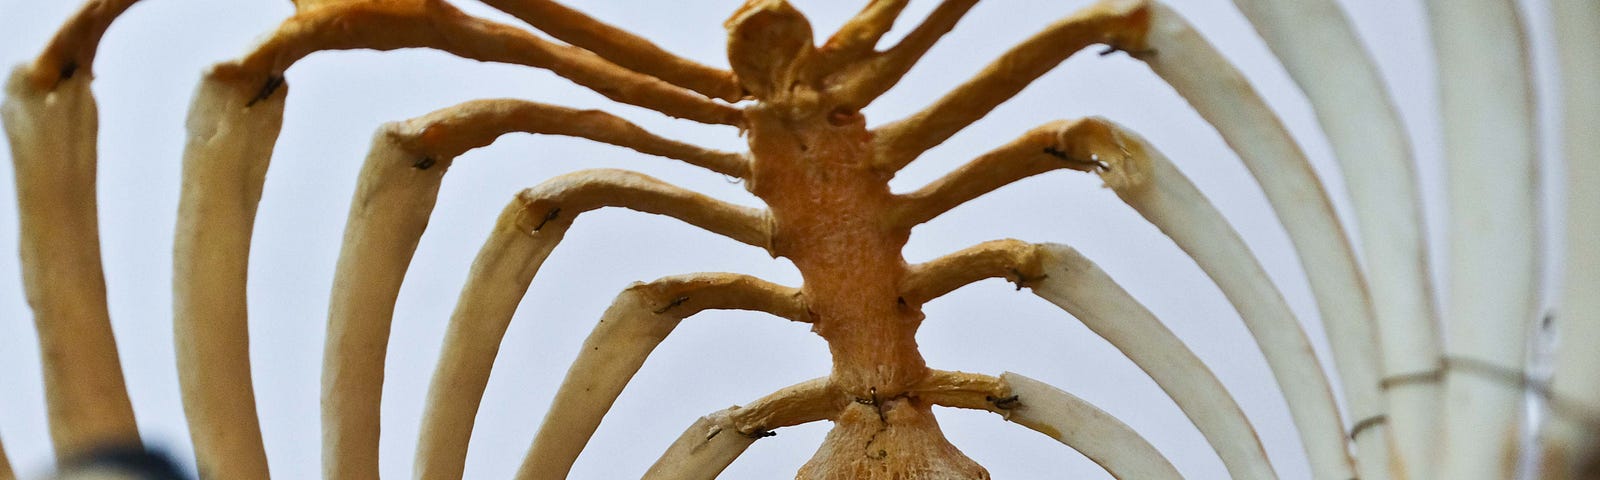 A skeletal rib cage is pictured with the spinal column at the base of the photo.